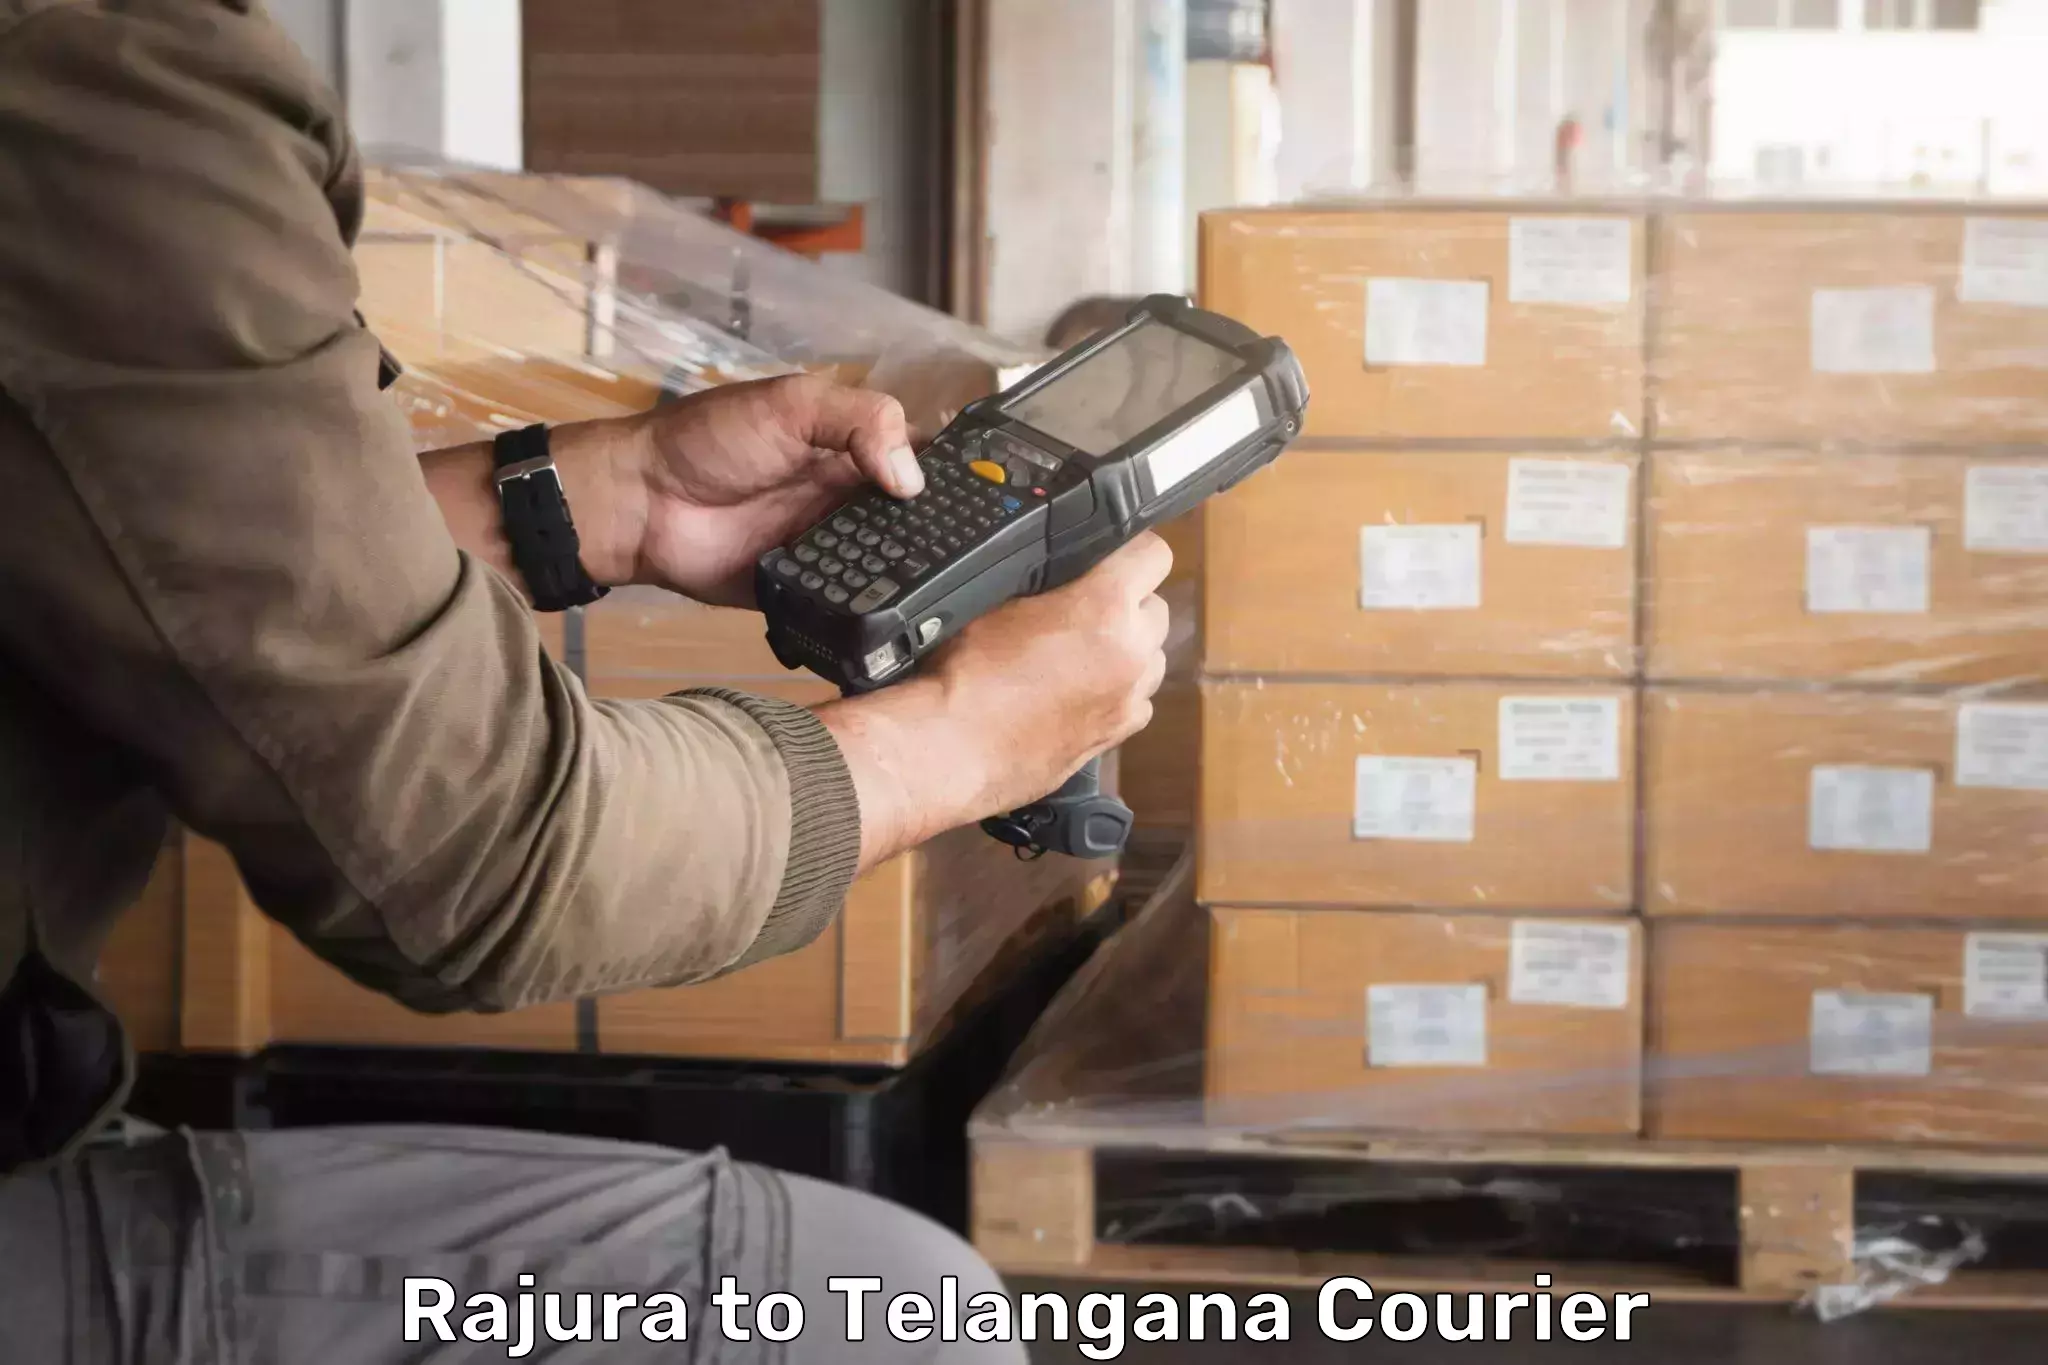 State-of-the-art courier technology Rajura to Danthalapally